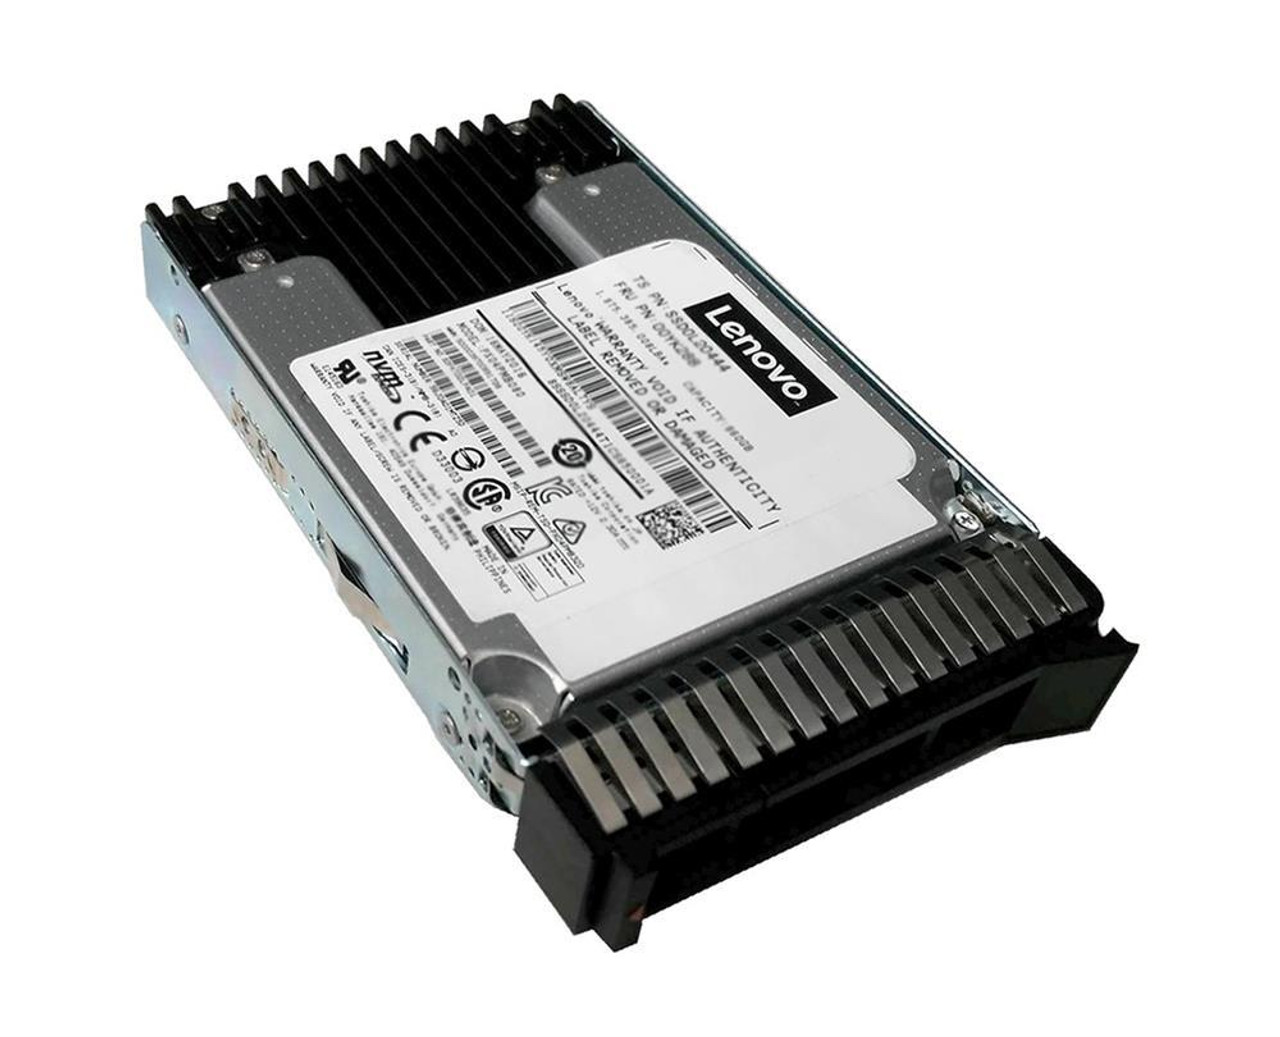 01GT716 Lenovo 3.84TB PCI Express 3.0 x4 NVMe 2.5-inch Internal Solid State Drive (SSD)